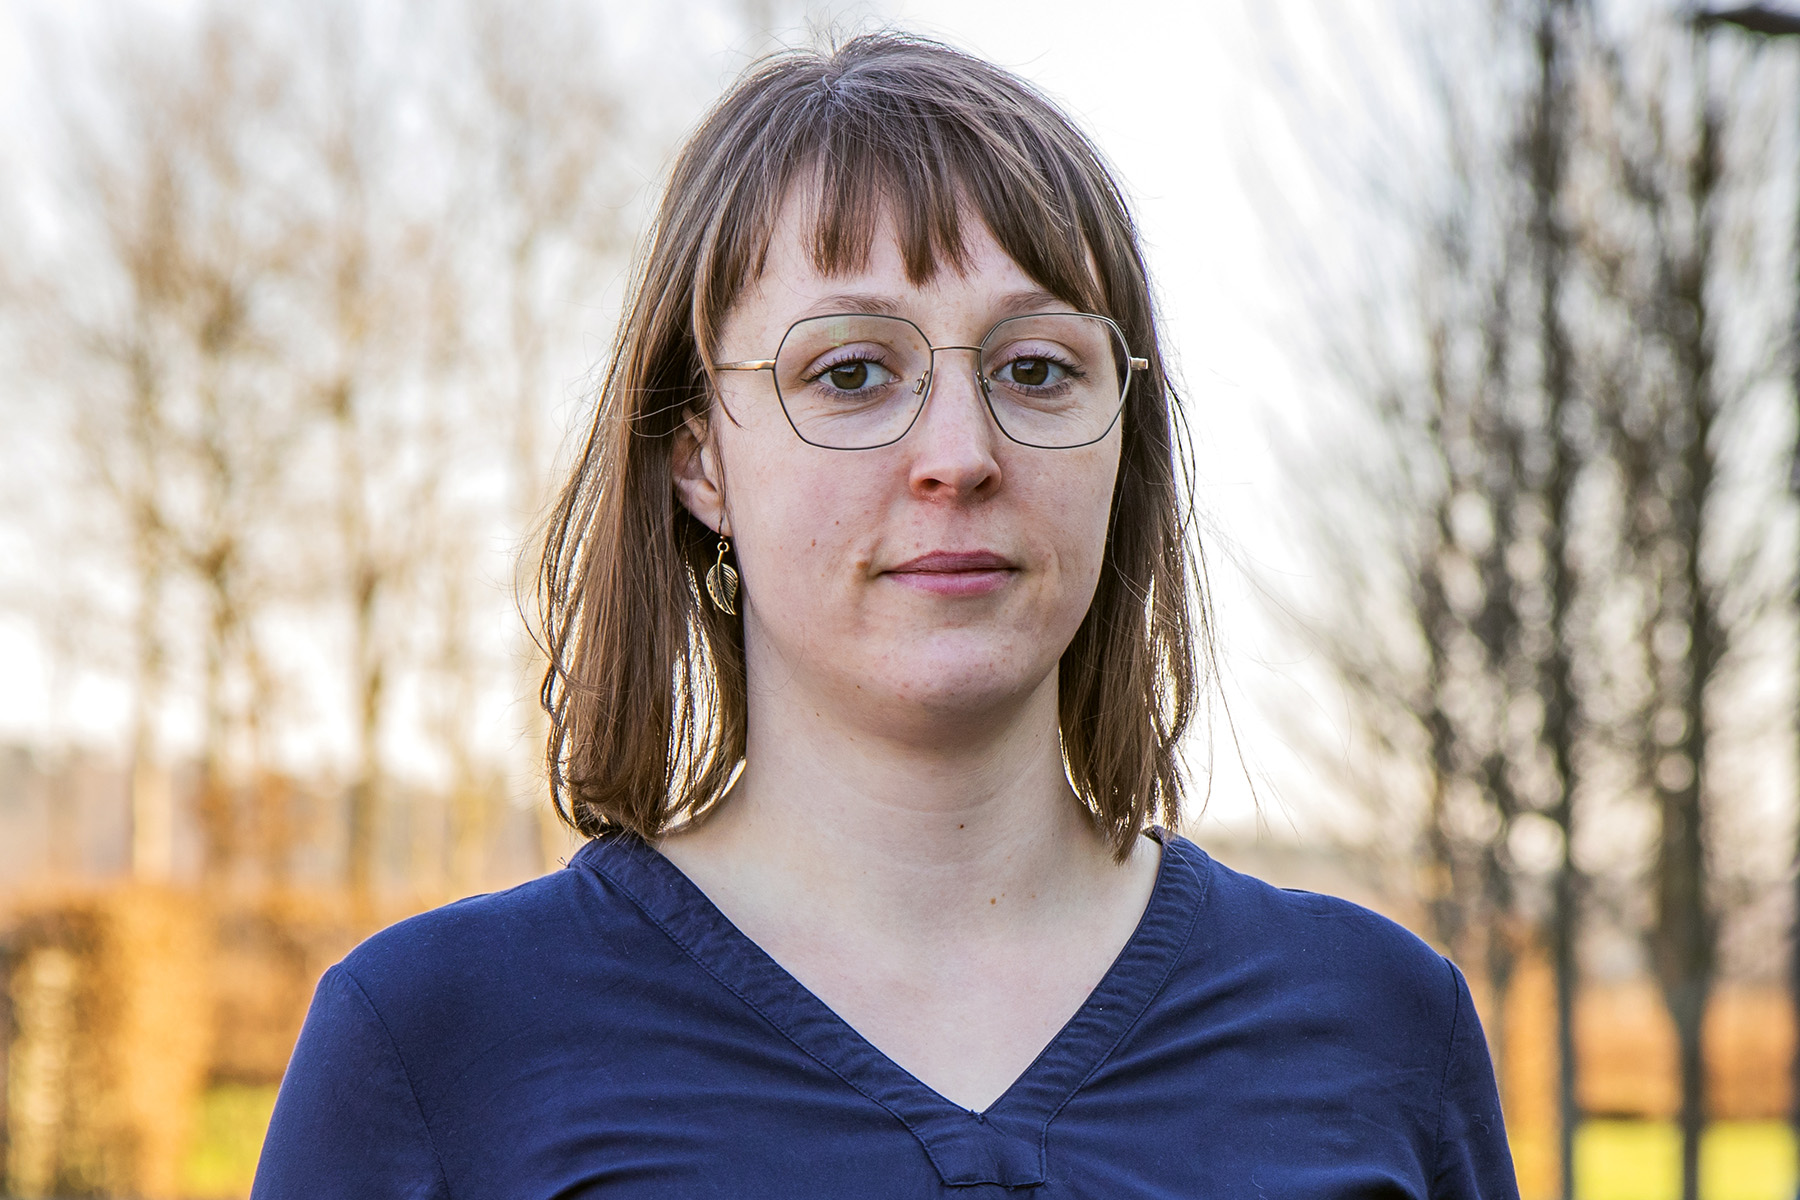 Interview with data evaluator Anika Lorenz about the ROSEN site in Dresden.